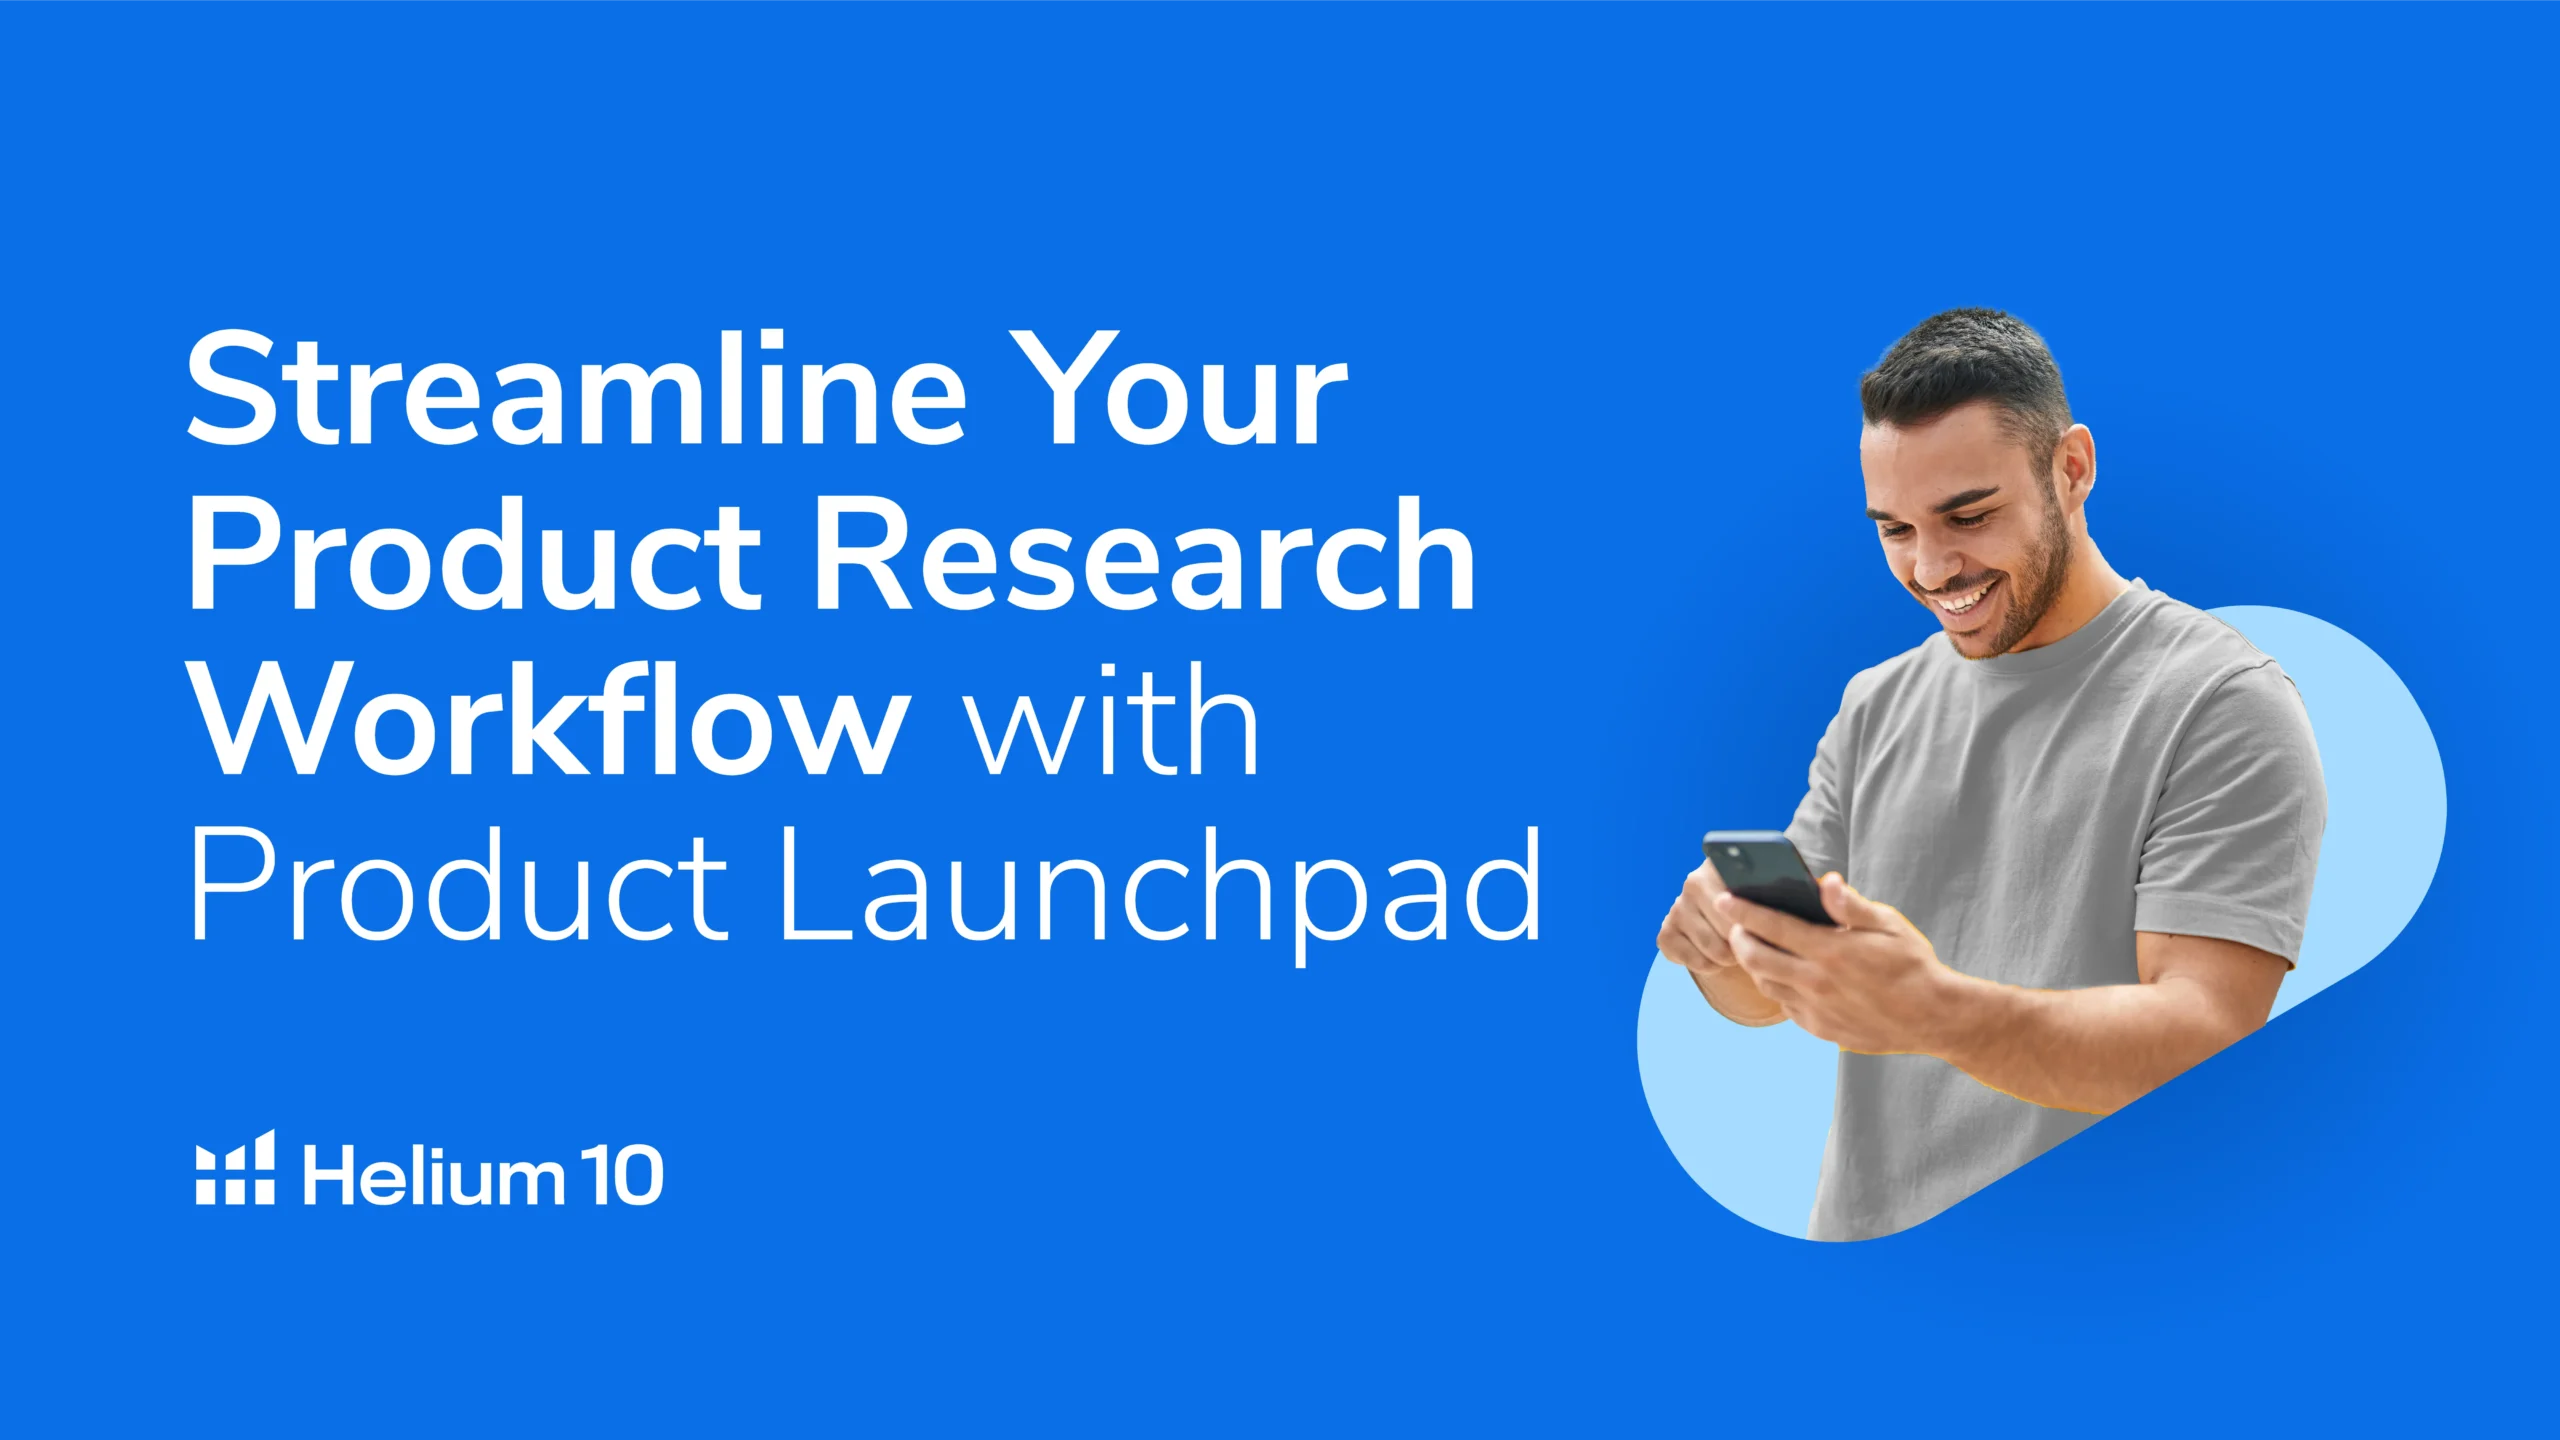 Product Launchpad